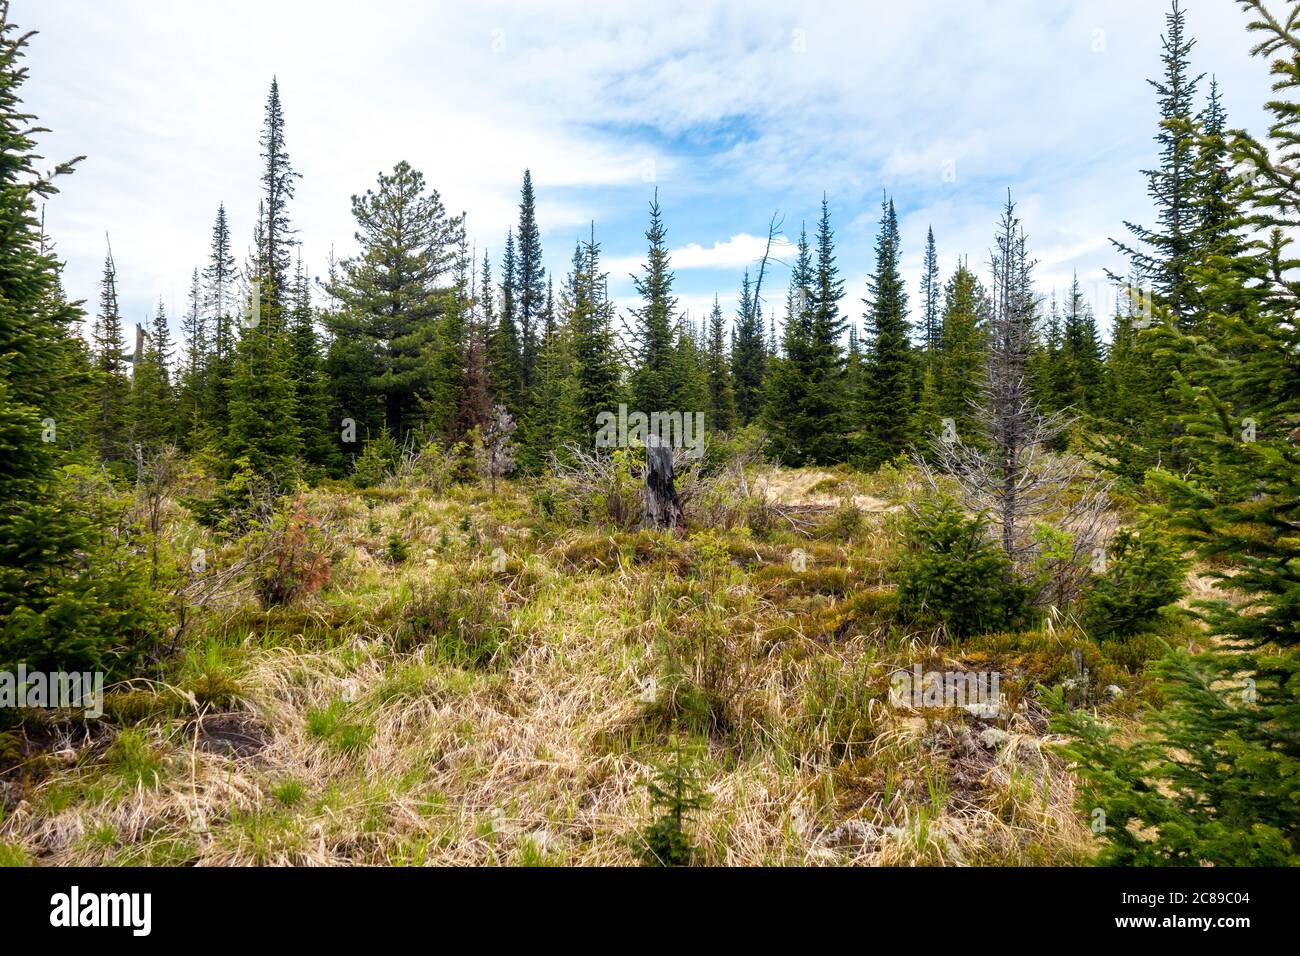 A picturesque overgrown forest glade with an old stump against the background of a spruce forest. Atmospheric coniferous trees in a mountain forest. Stock Photo